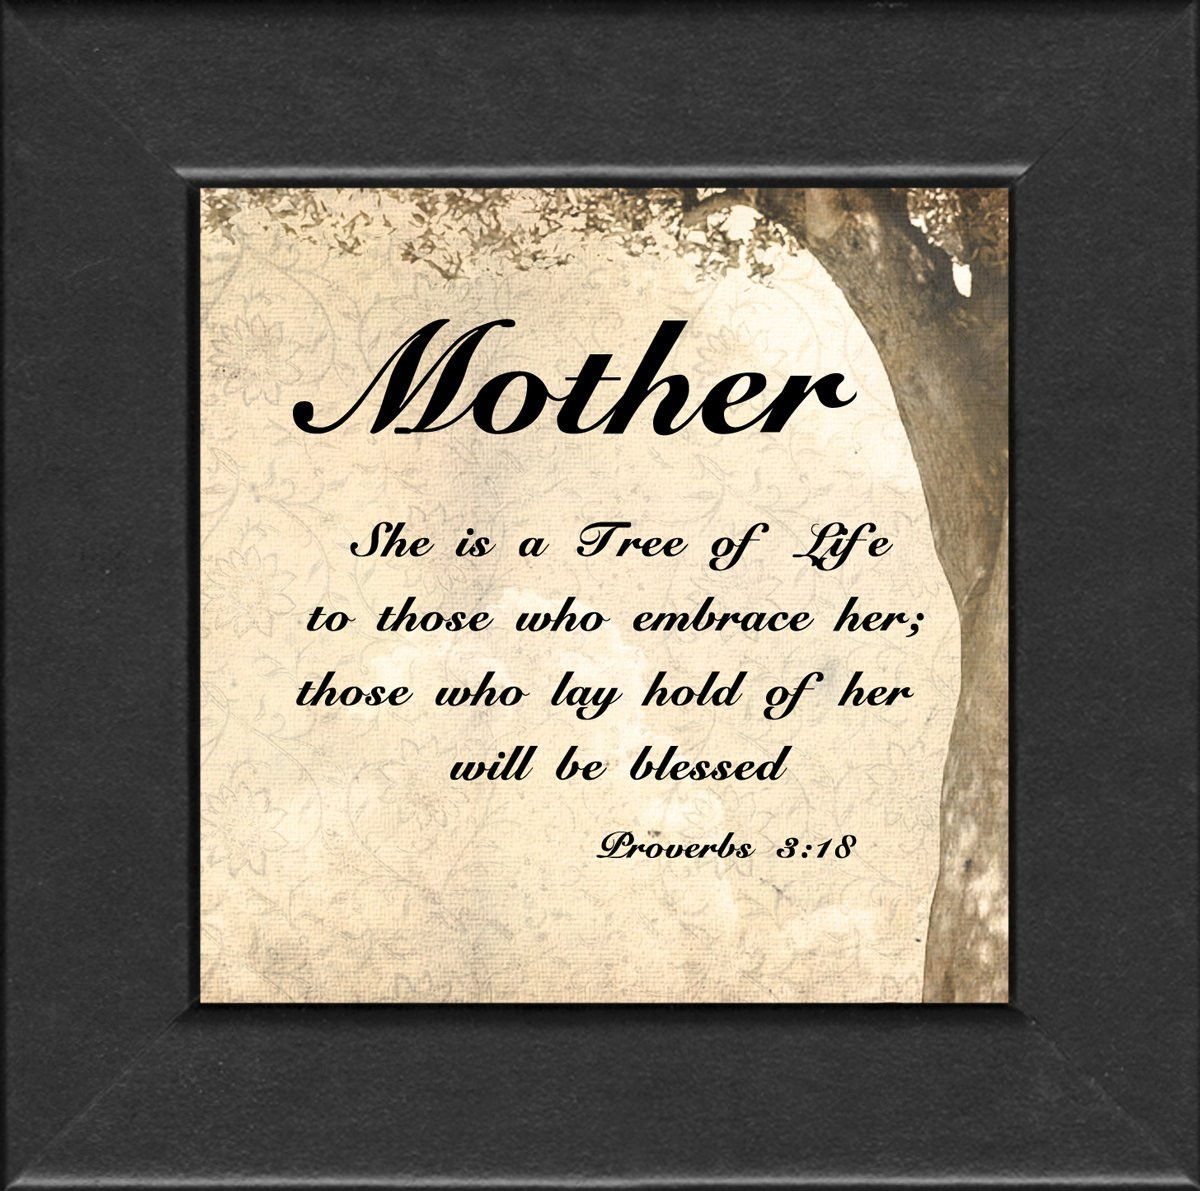 Mothers Biblical Quotes
 Mother Bible Verses Quotes QuotesGram